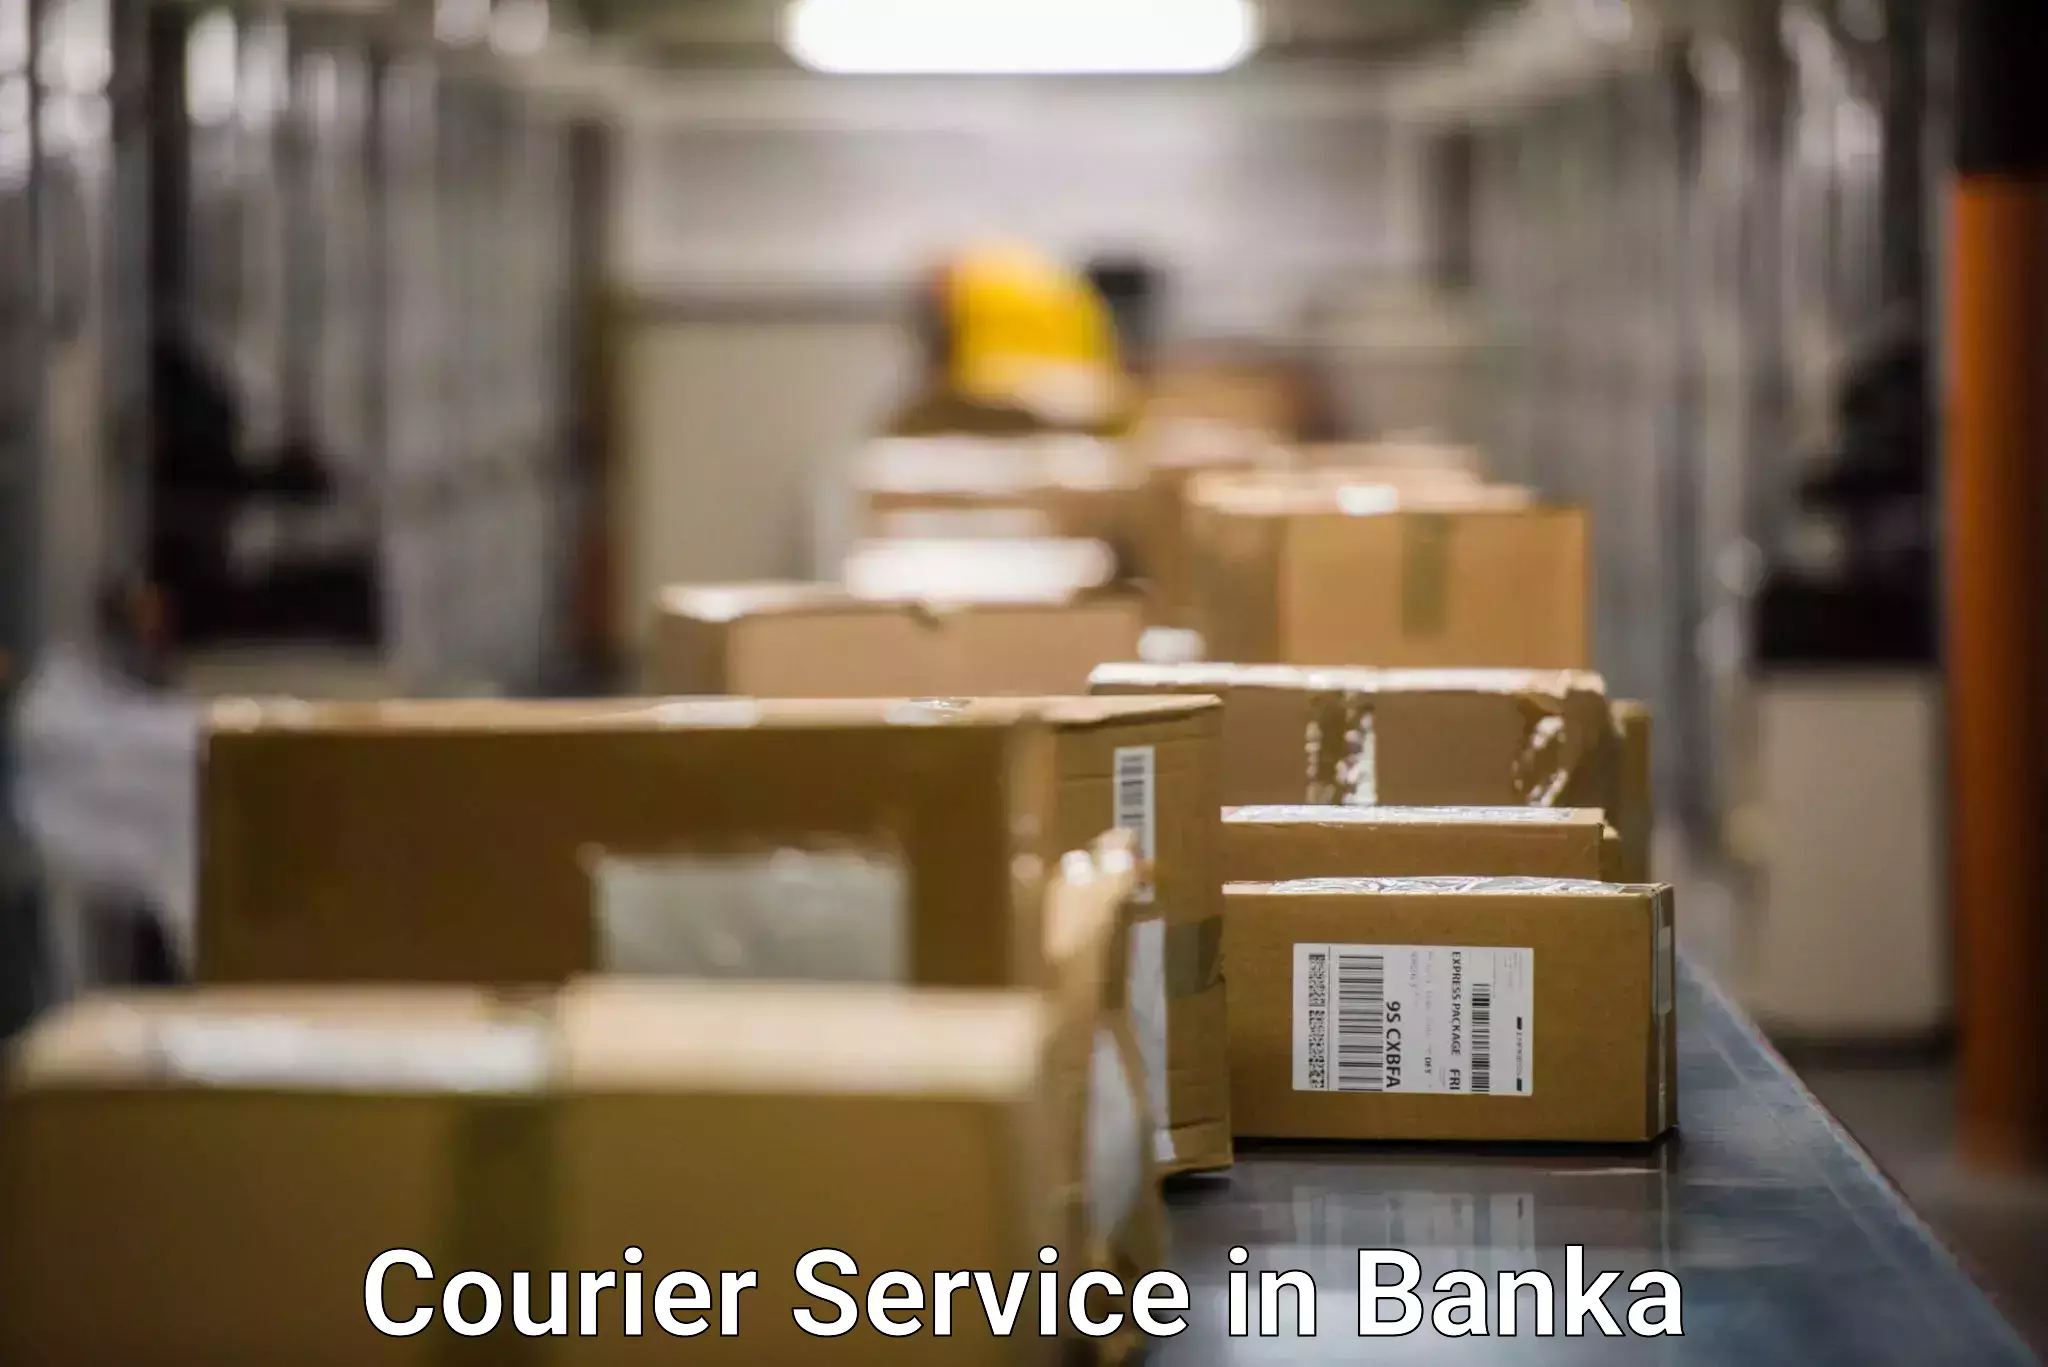 Efficient package consolidation in Banka